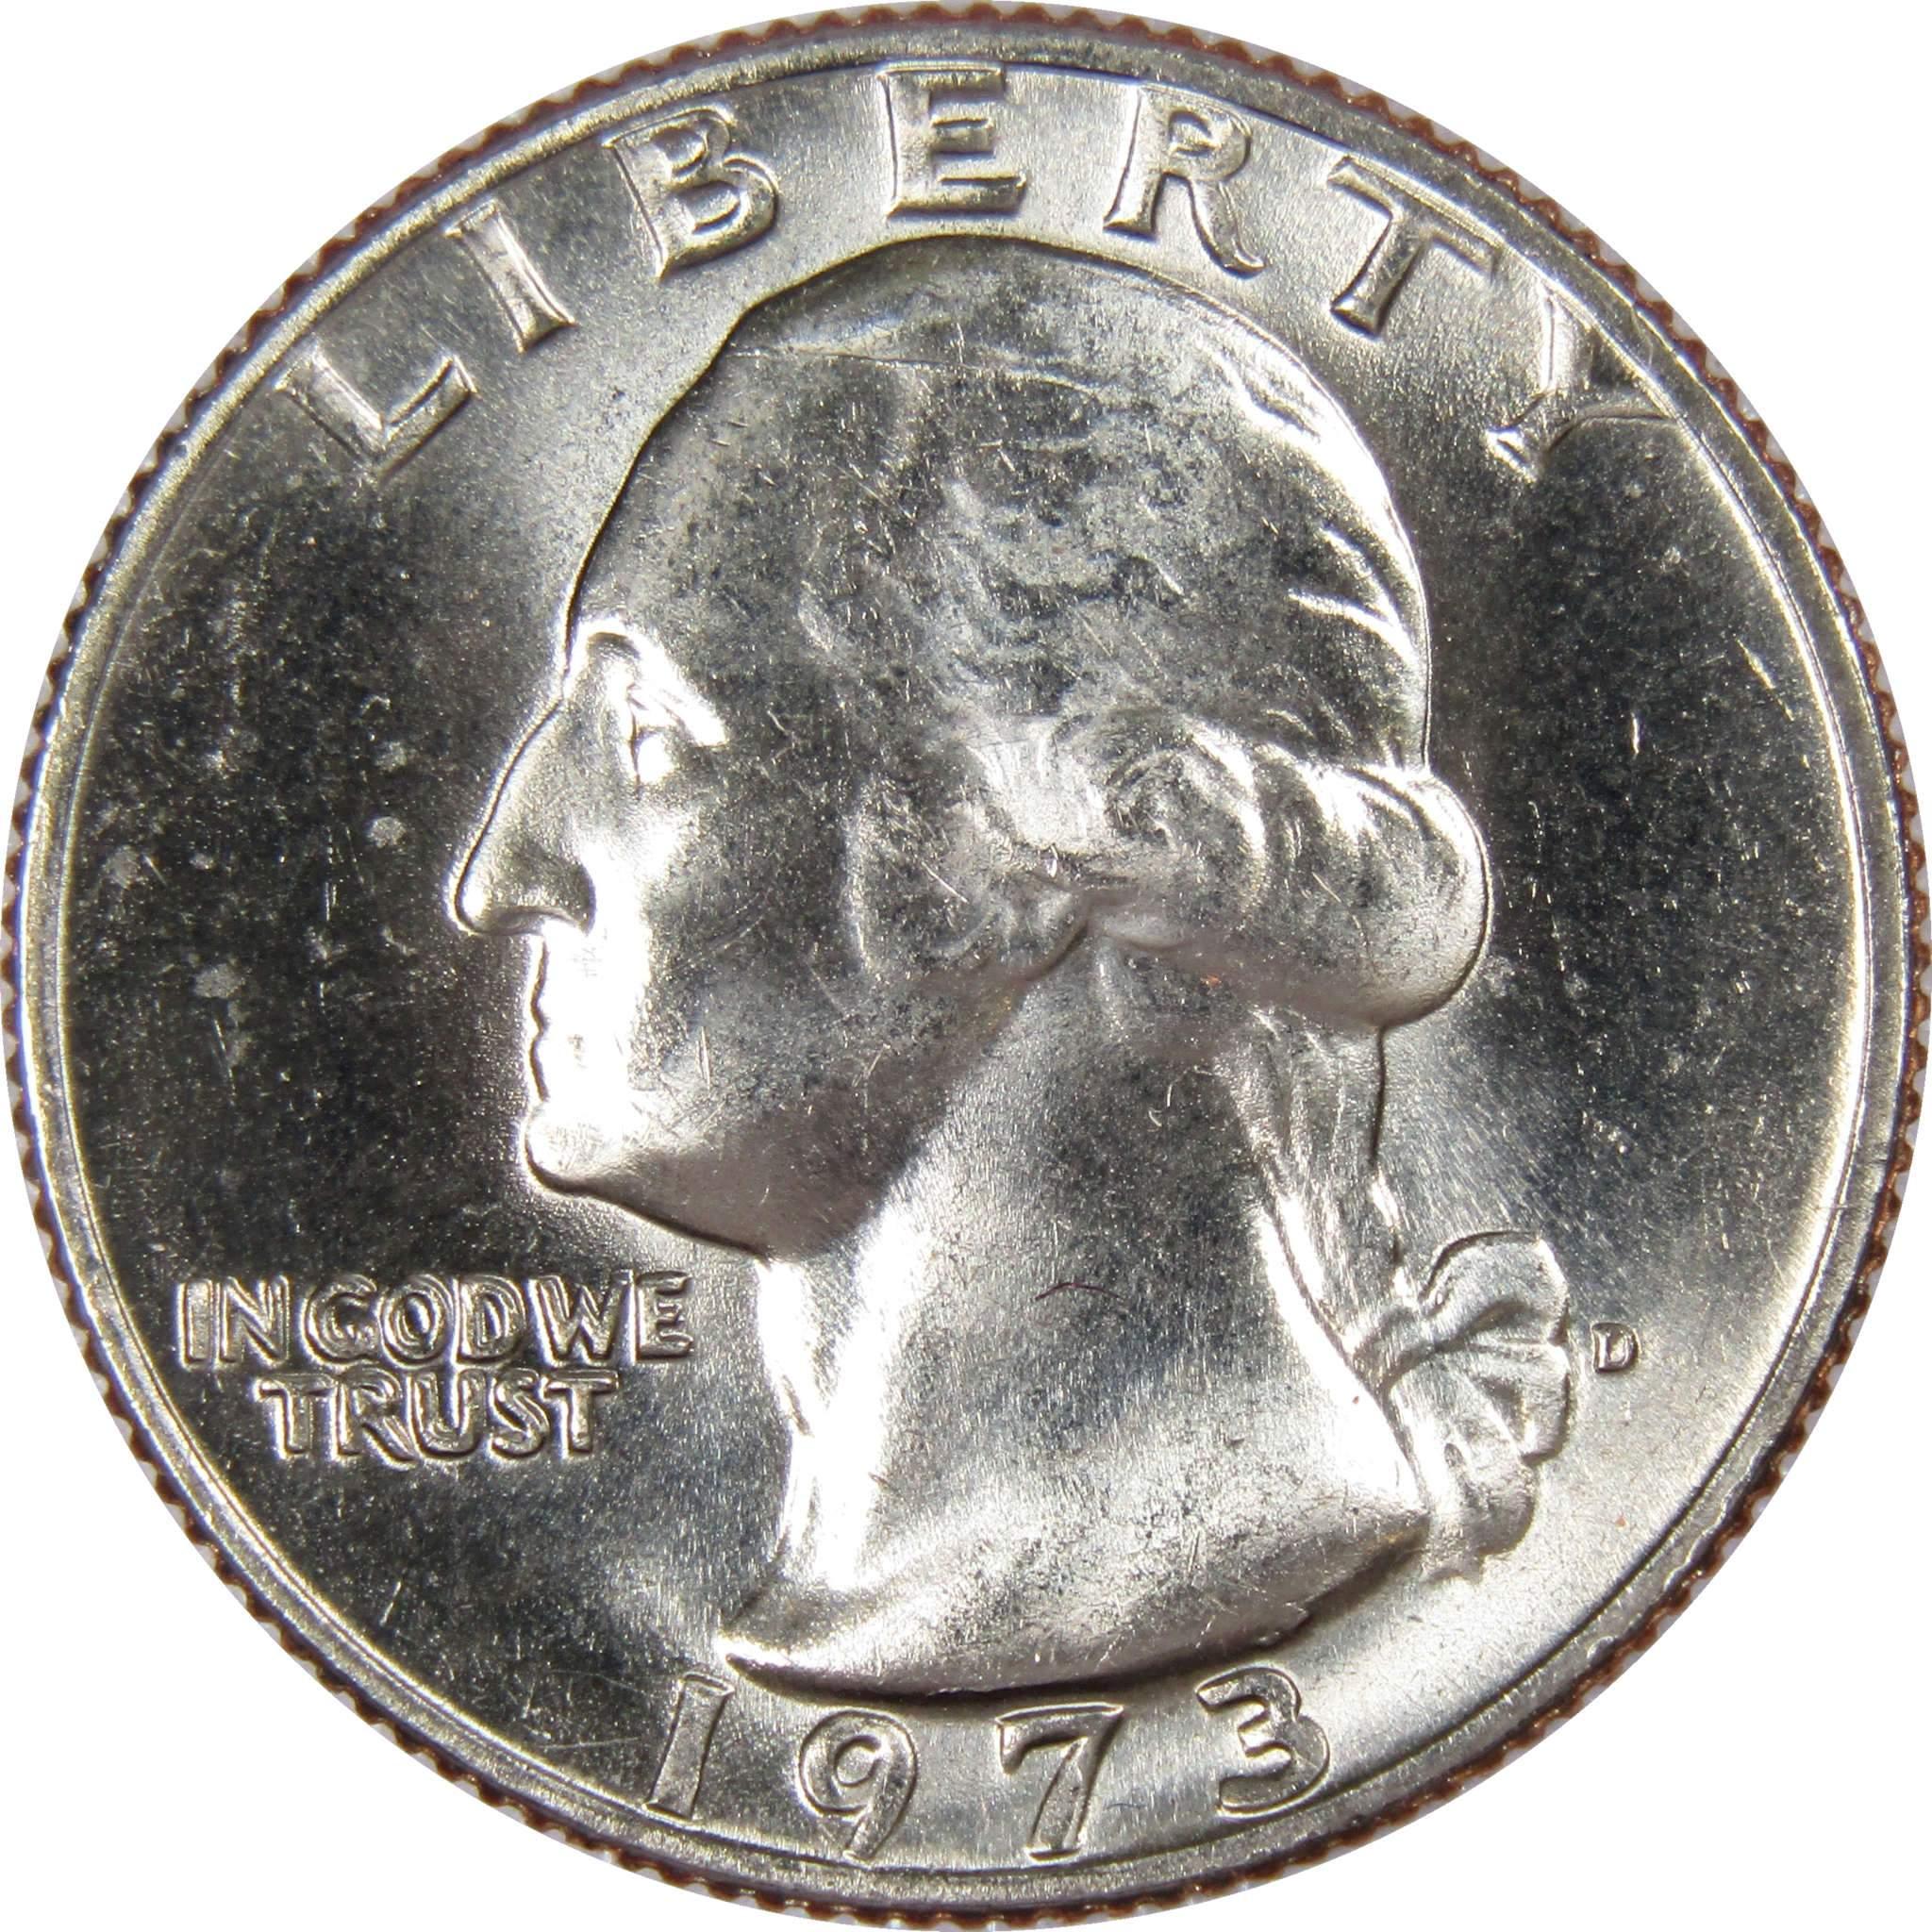 1973 D Washington Quarter BU Uncirculated Mint State 25c US Coin Collectible